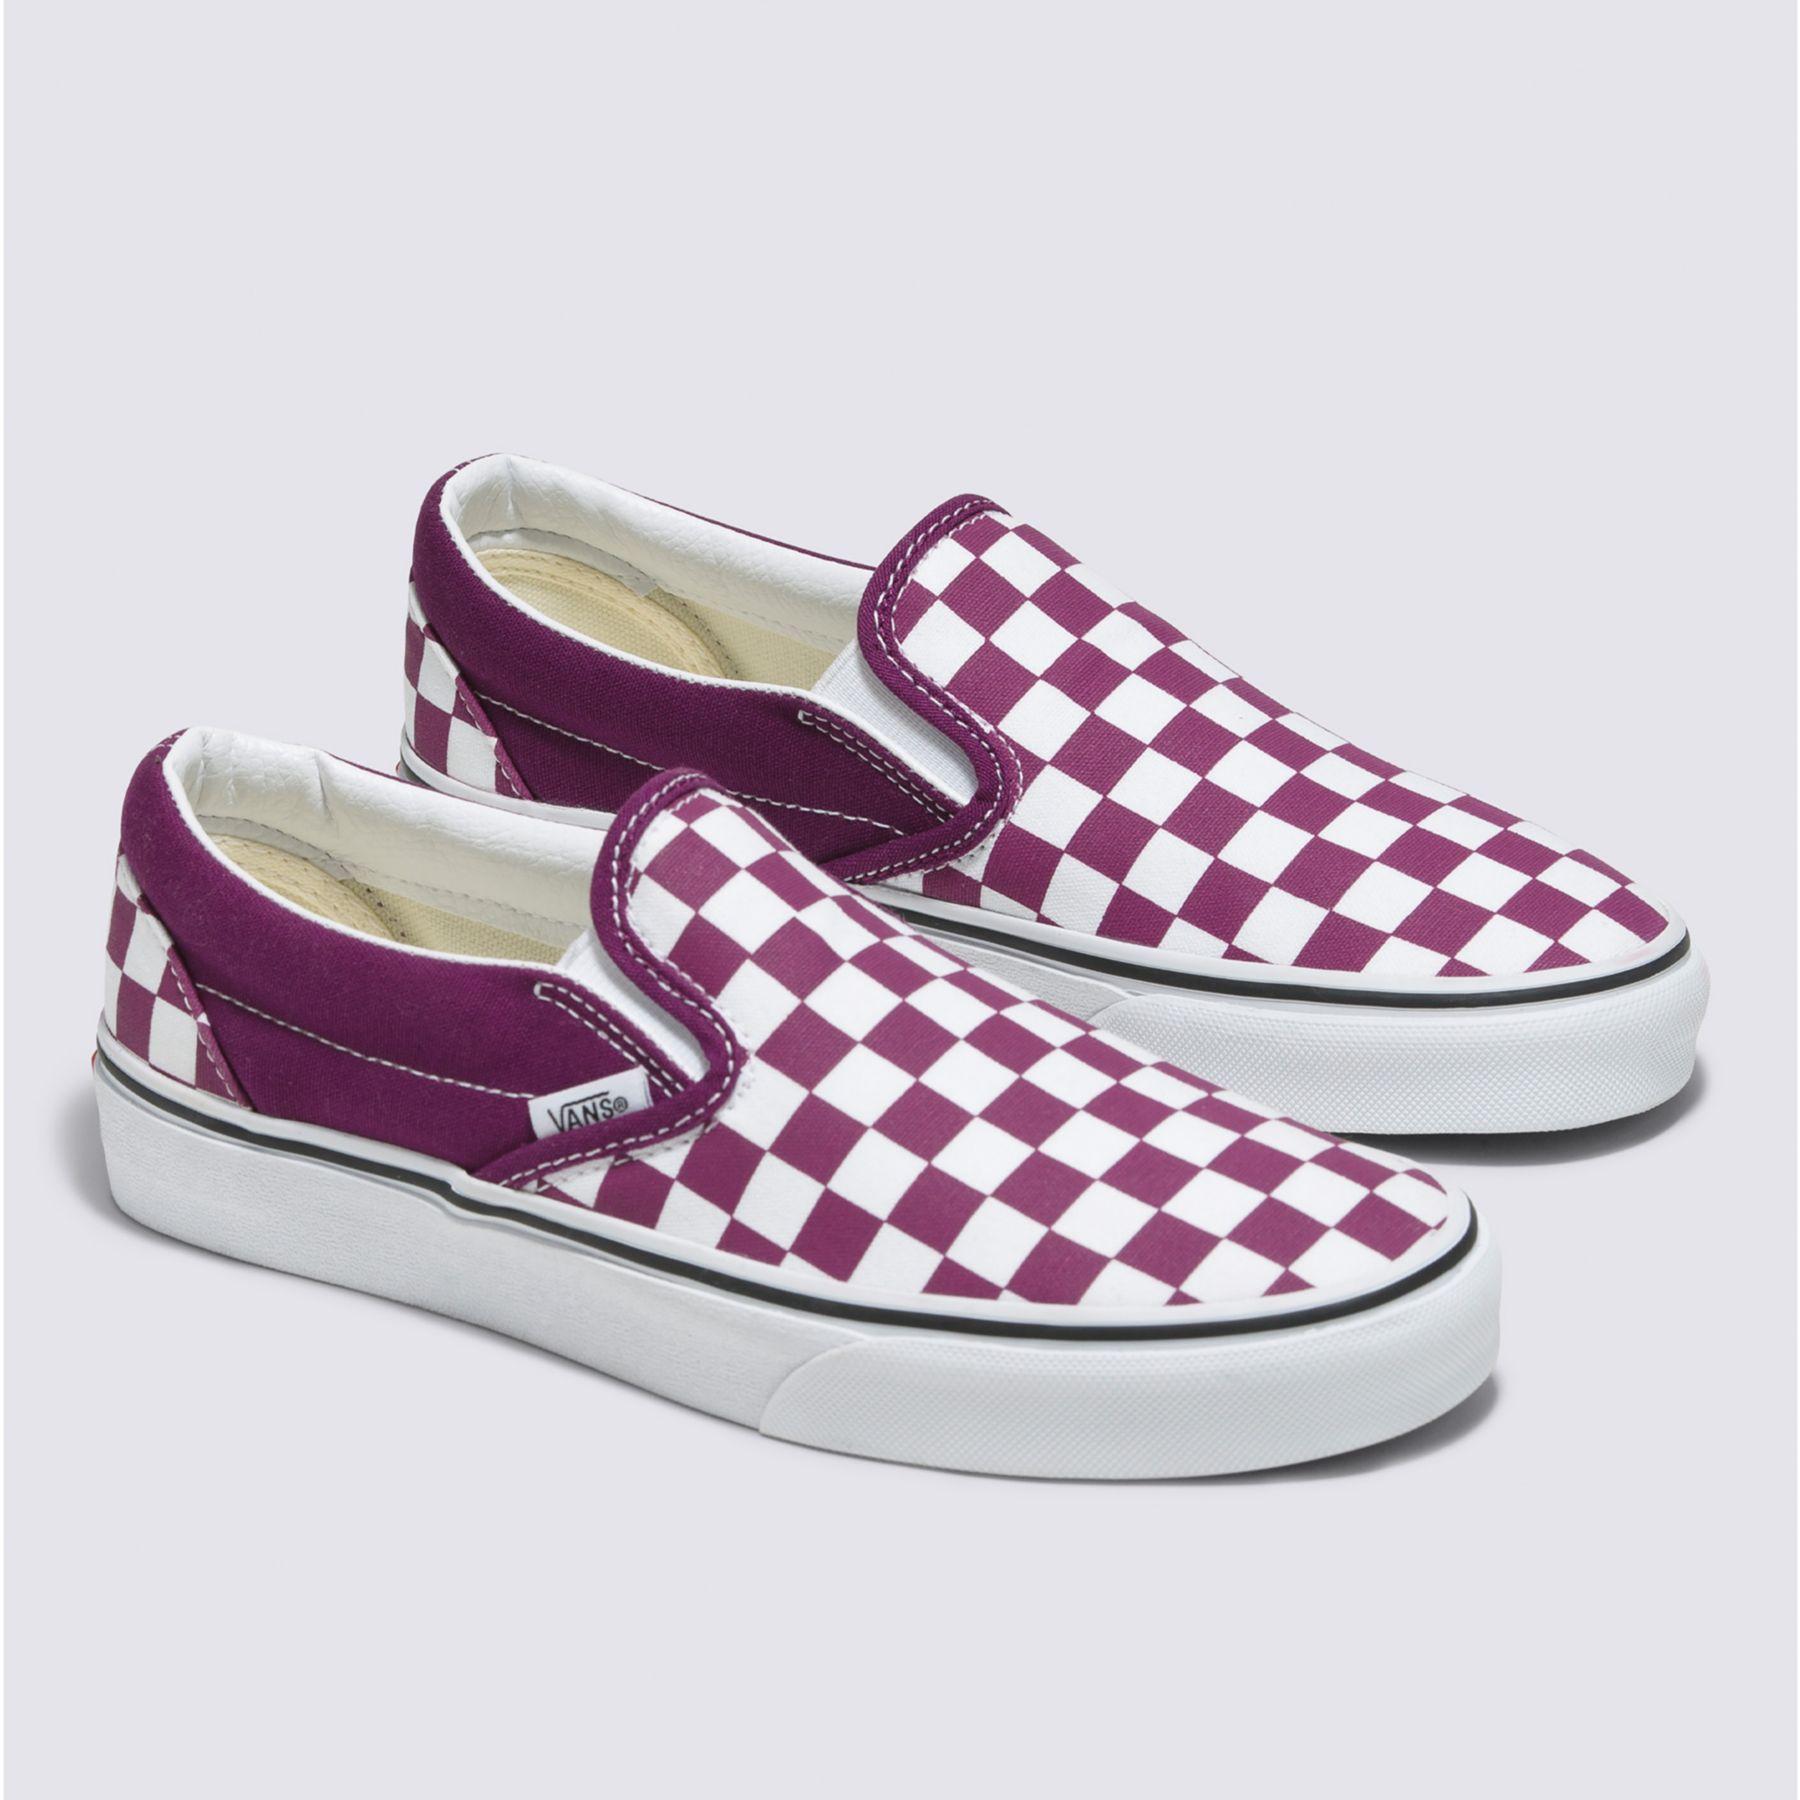 Vans Checkerboard Color Theory Classic Slip-on Shoes in Purple | Lyst UK